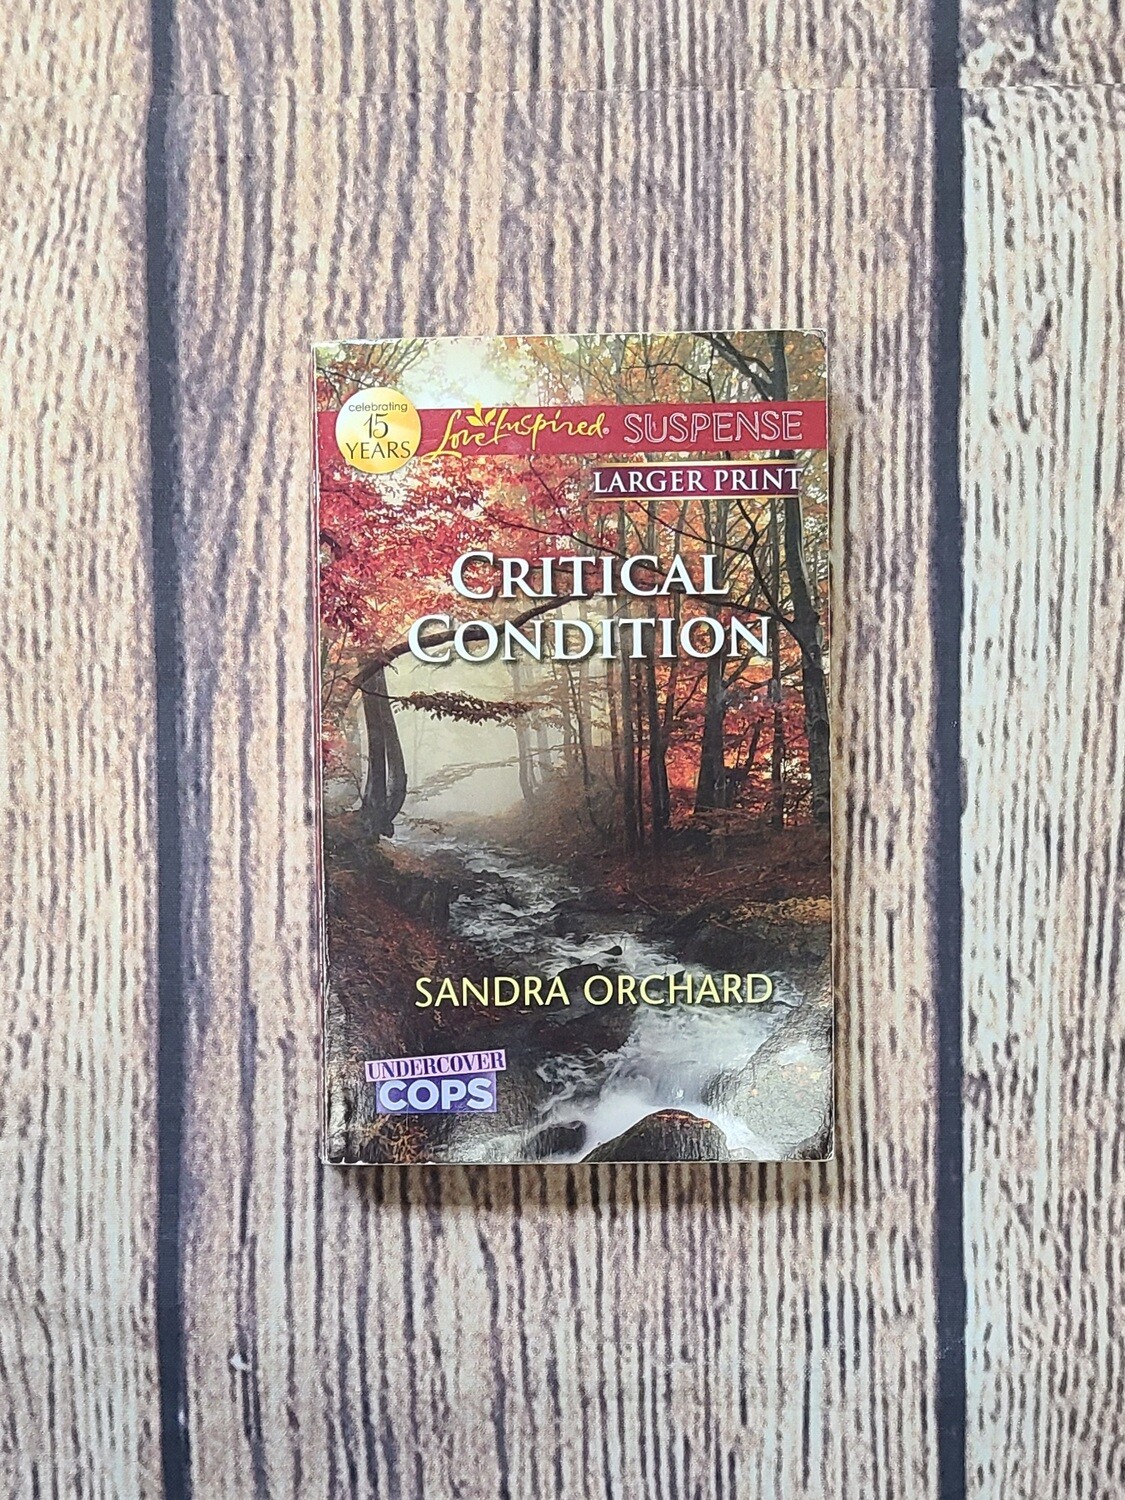 Critical Condition by Sandra Orchard